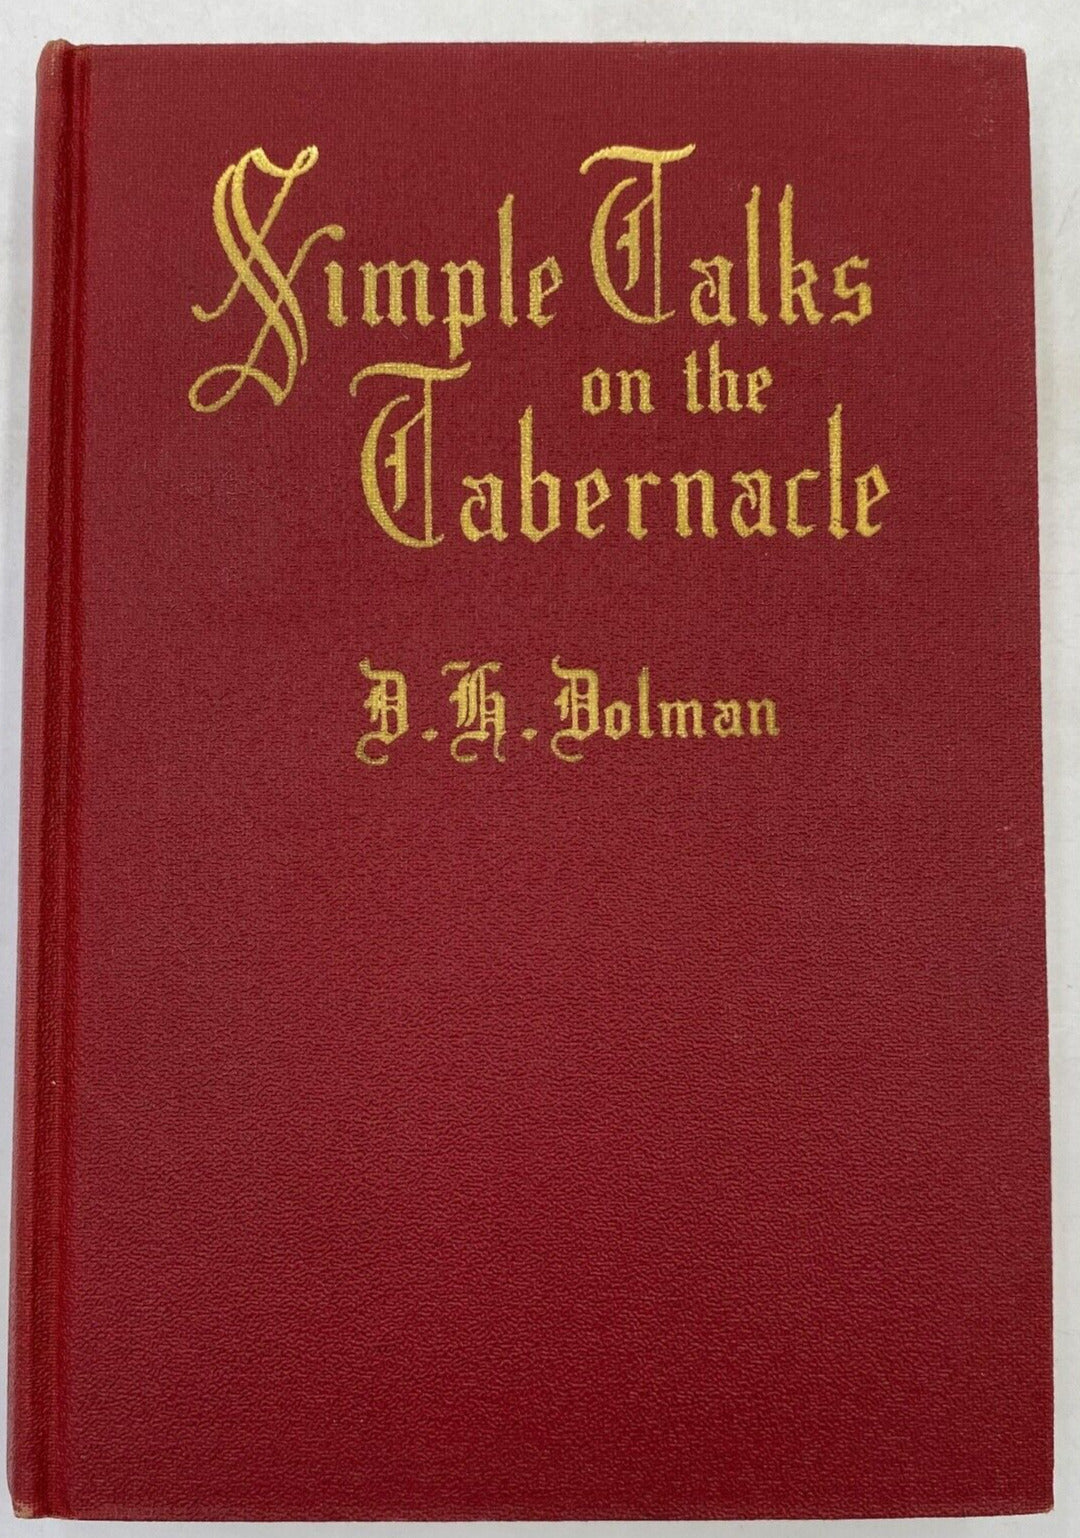 Simple Talks on the Tabernacle - 1941 Hardcover by D. H. Dolman